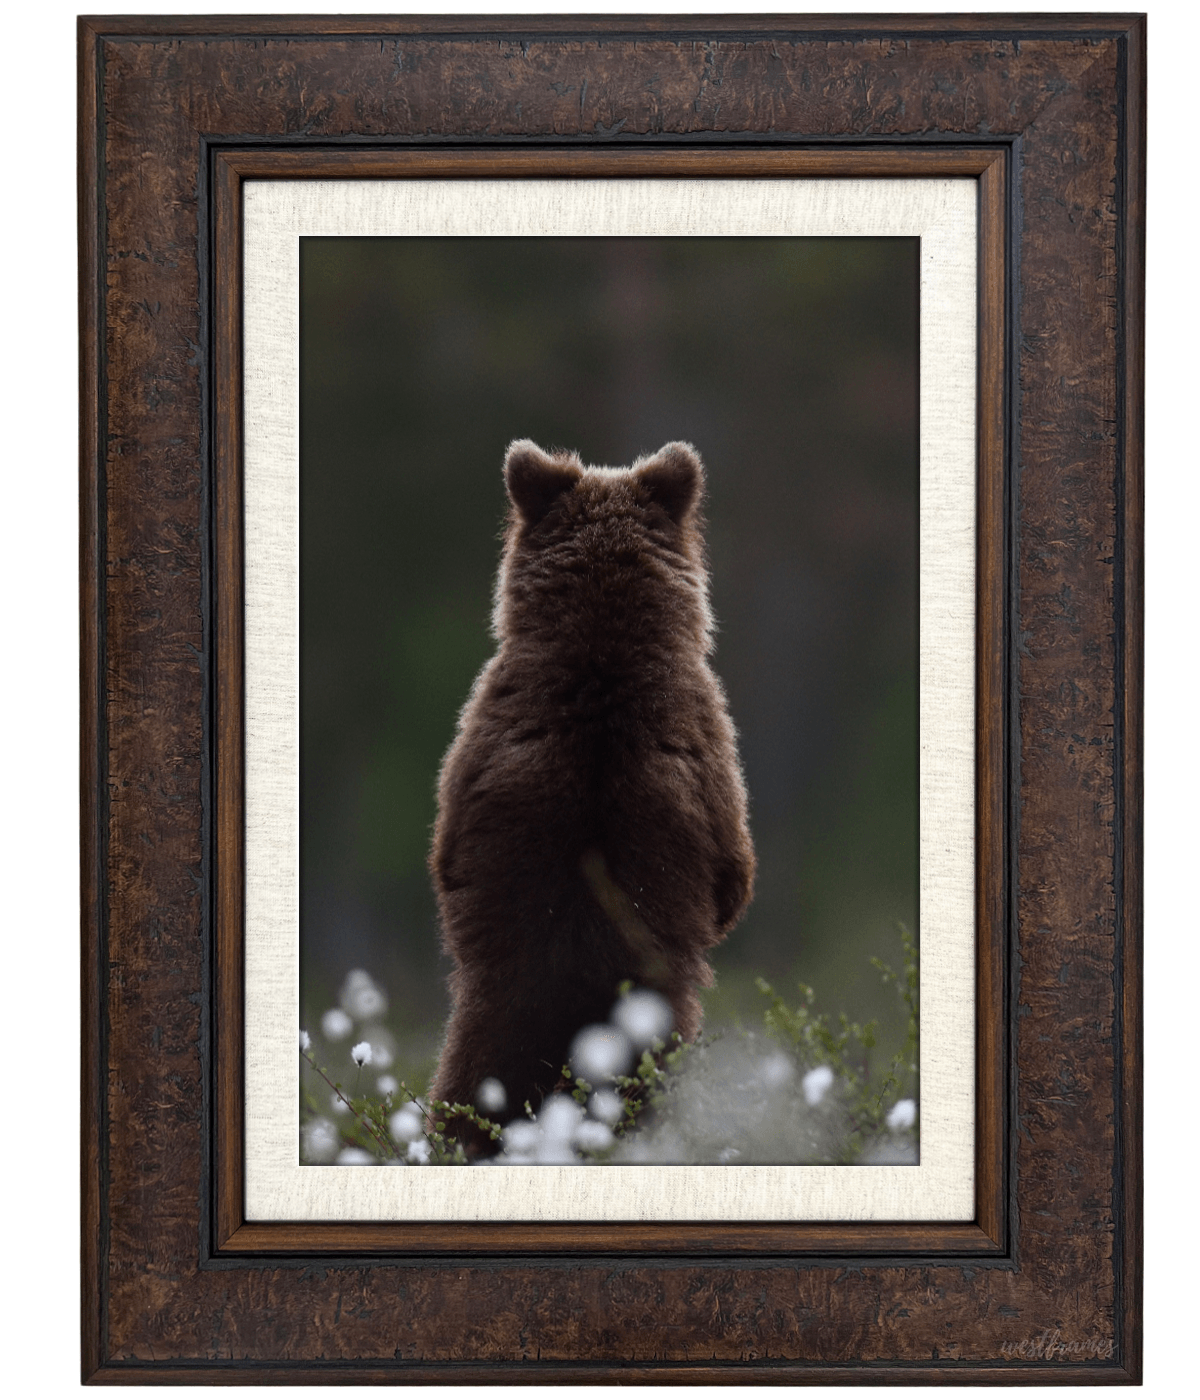 Marcello Rustic Distressed Walnut Brown with Linen Liner Wall Picture Frame 3.75" - West Frames